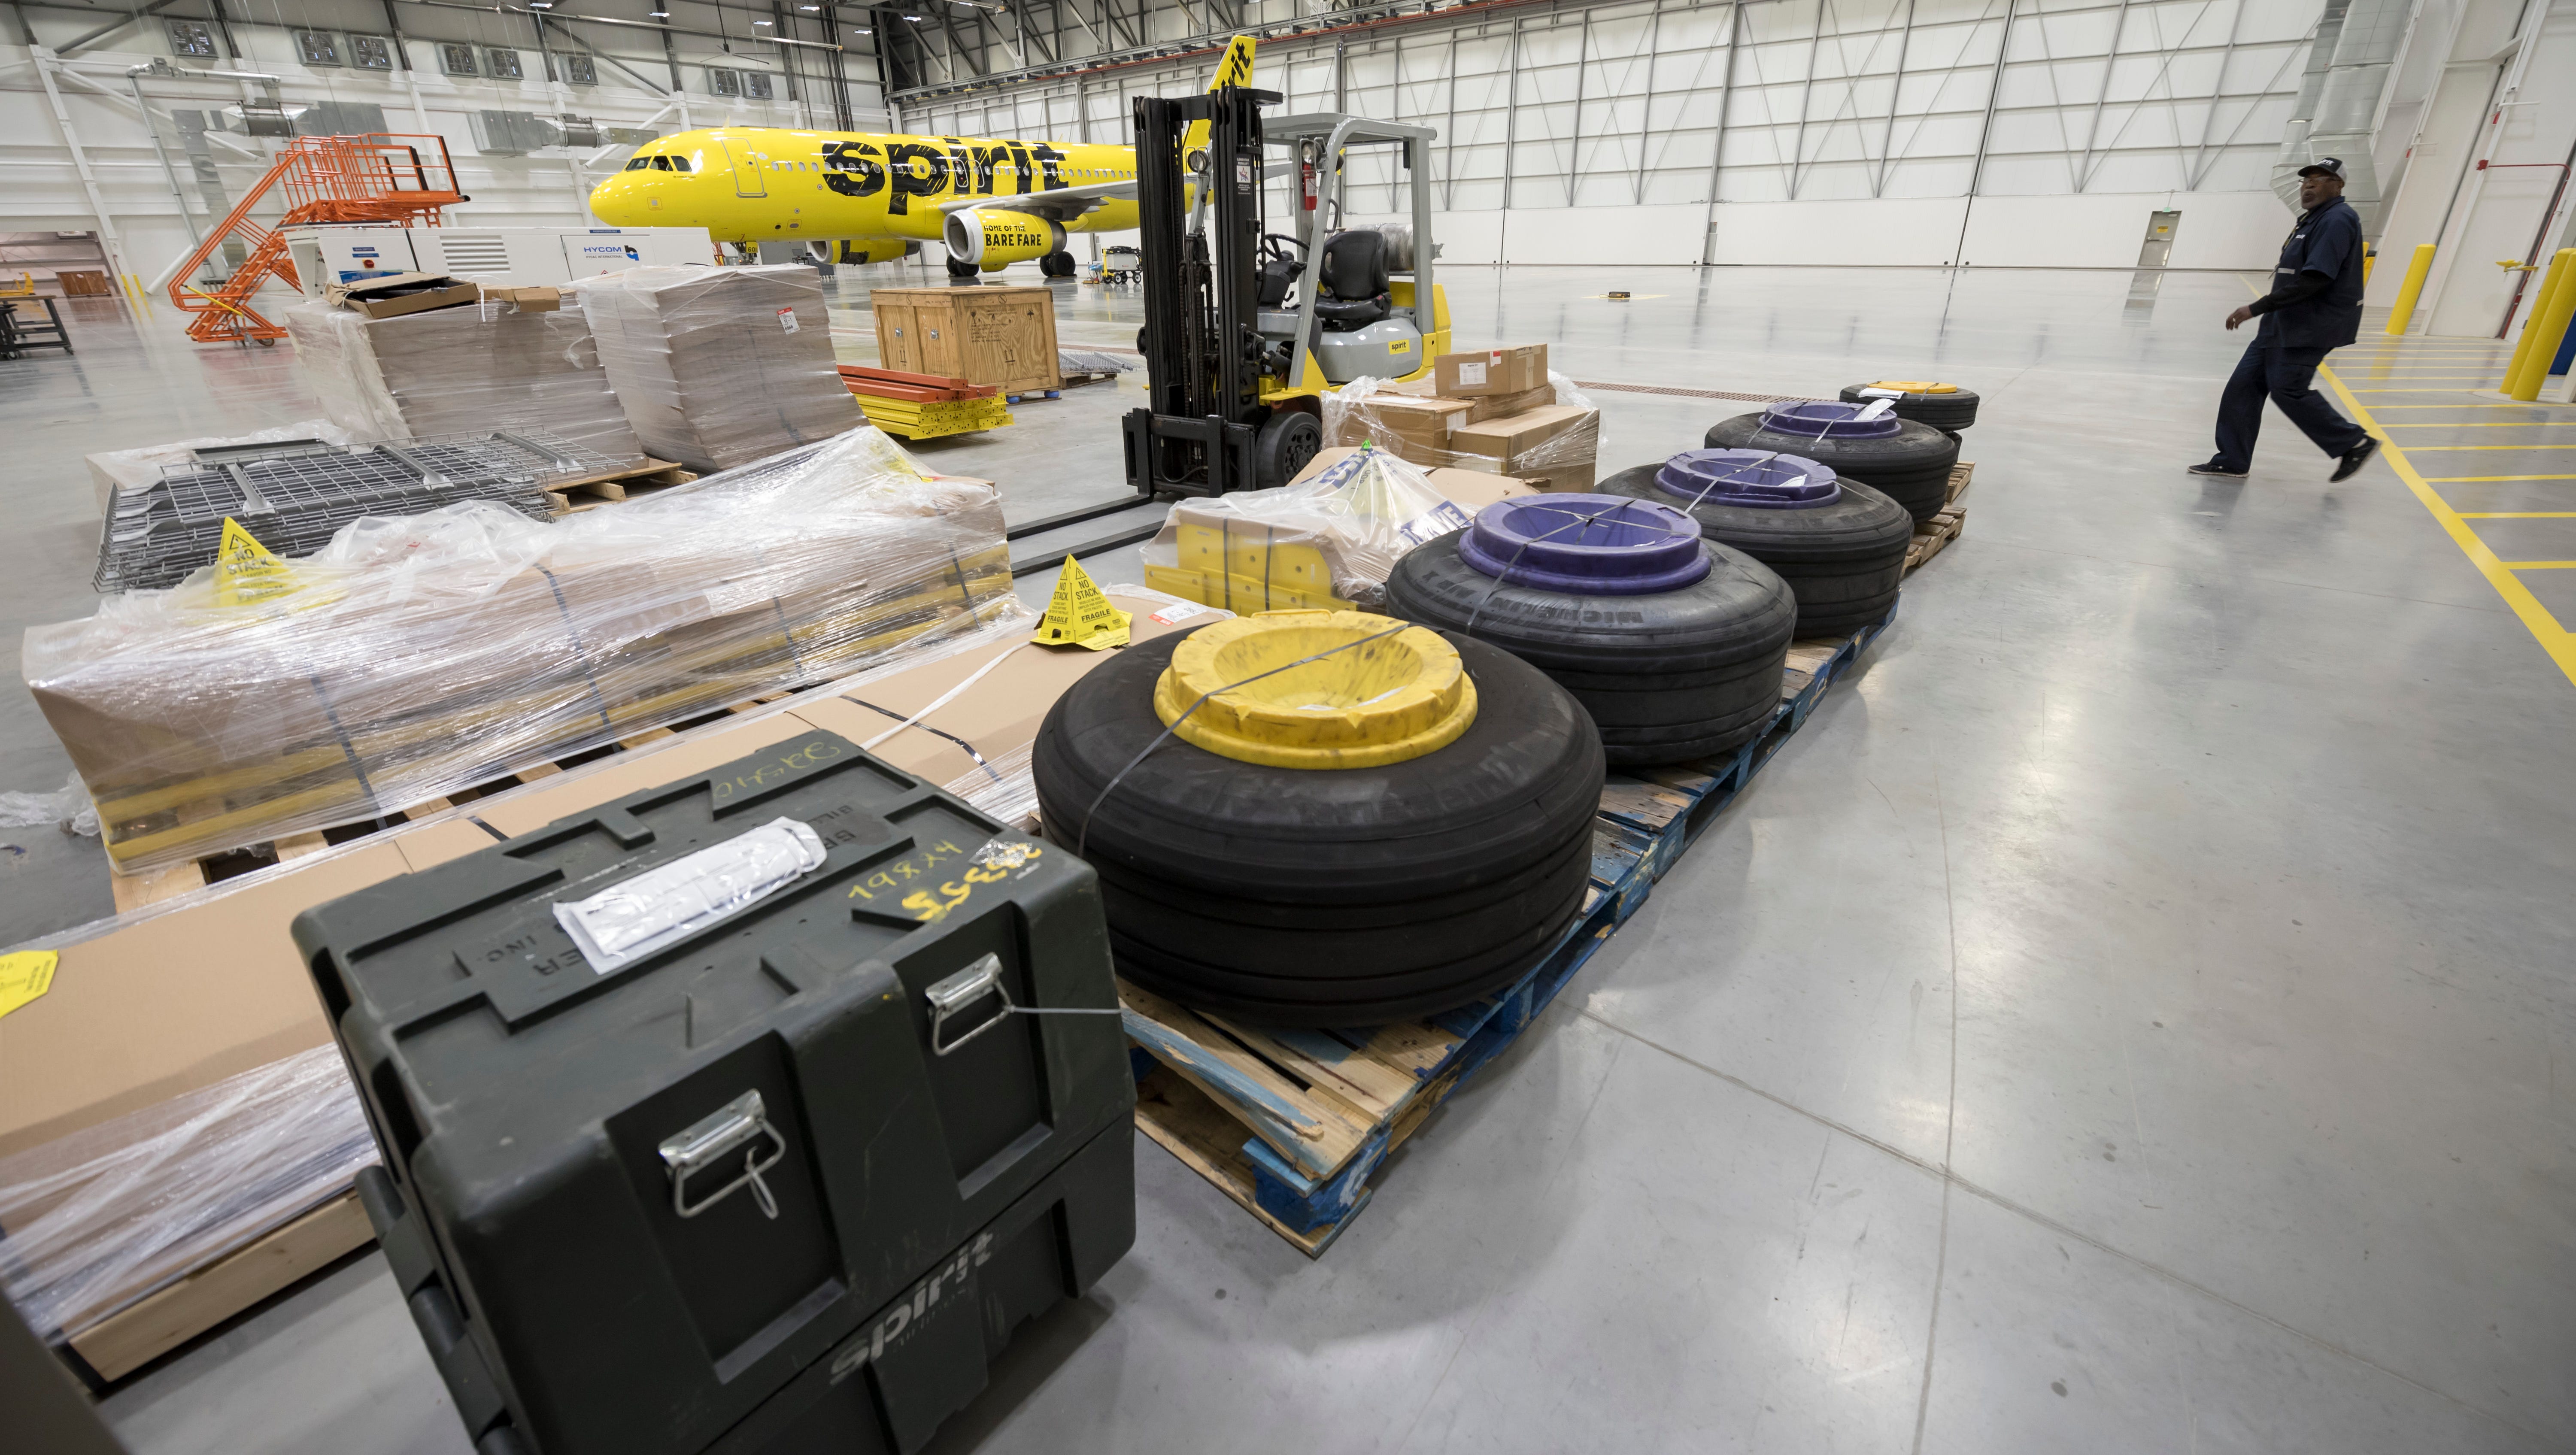 Tires that have been removed from airplanes along with other parts are stored in the main hangar bay.